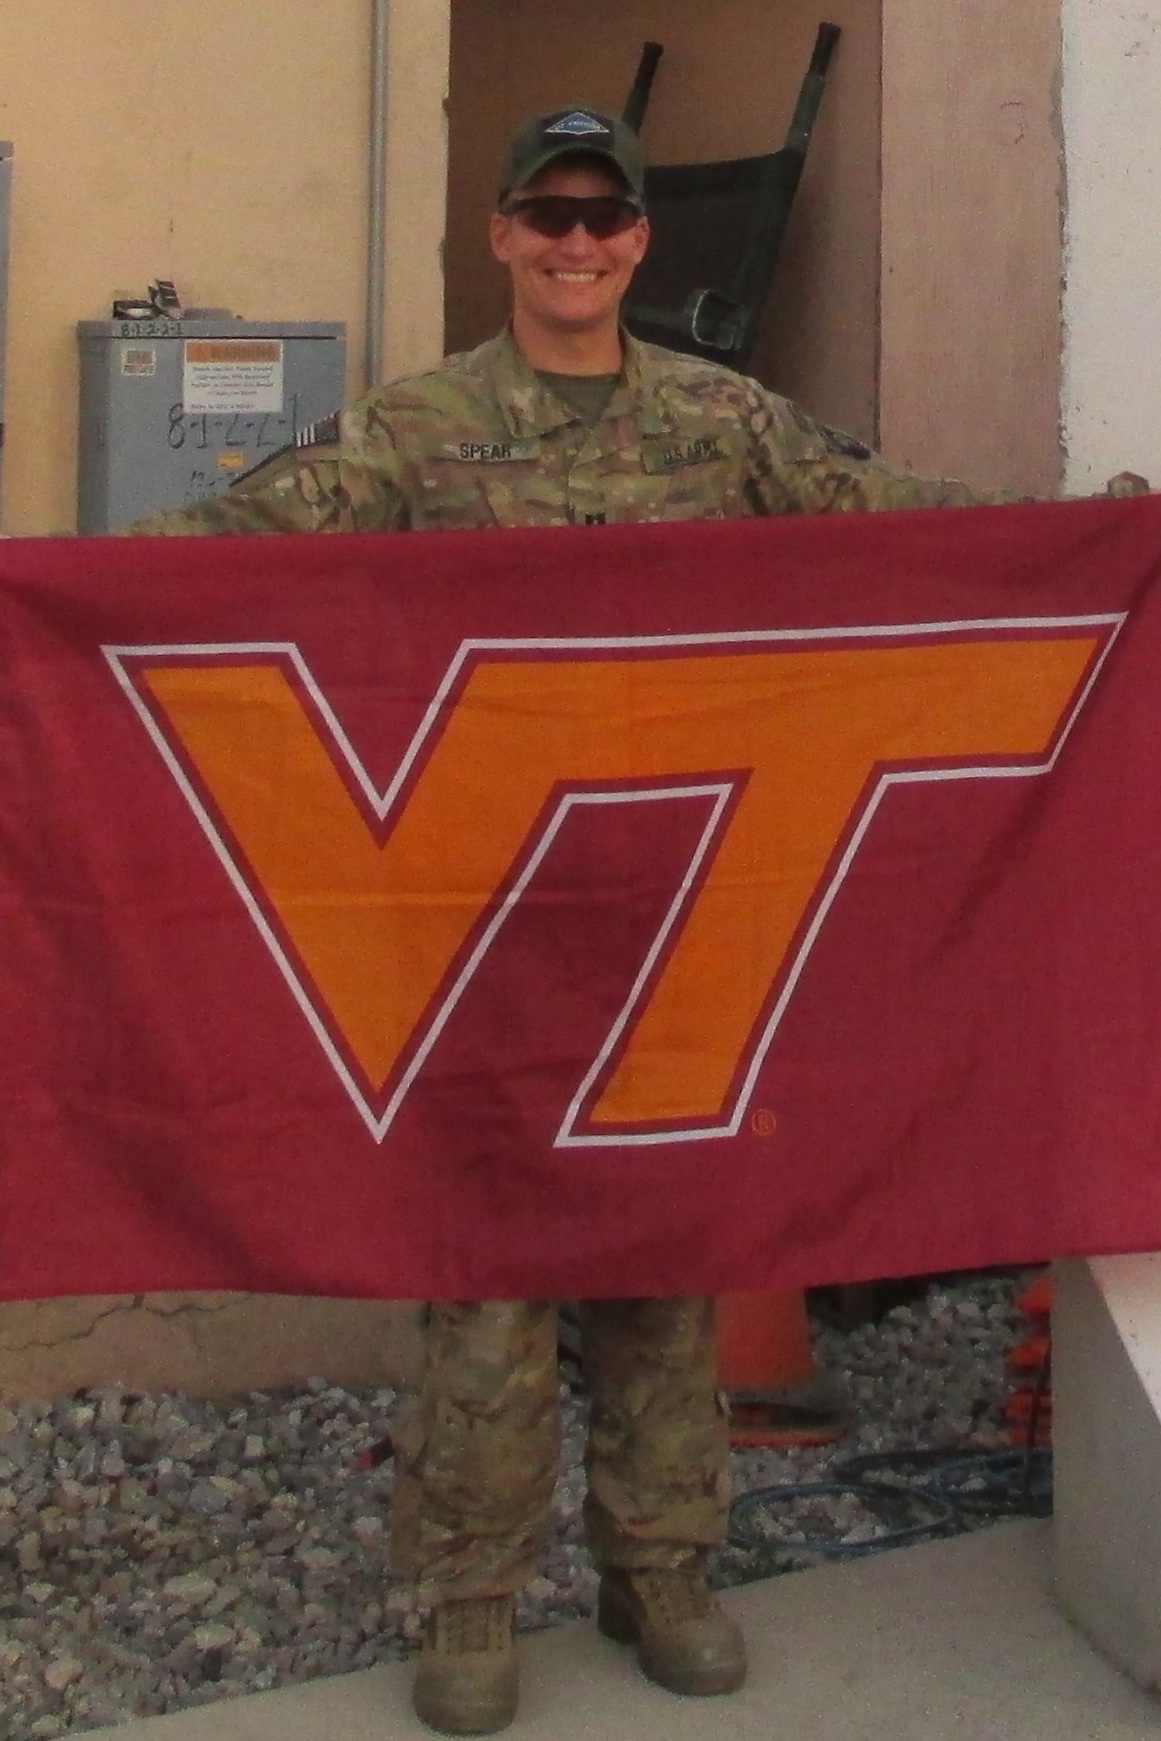 Capt. Bryan Spear, U.S. Army, Virginia Tech Corps of Cadets Class of 2009 from his deployed location in Afghanistan.